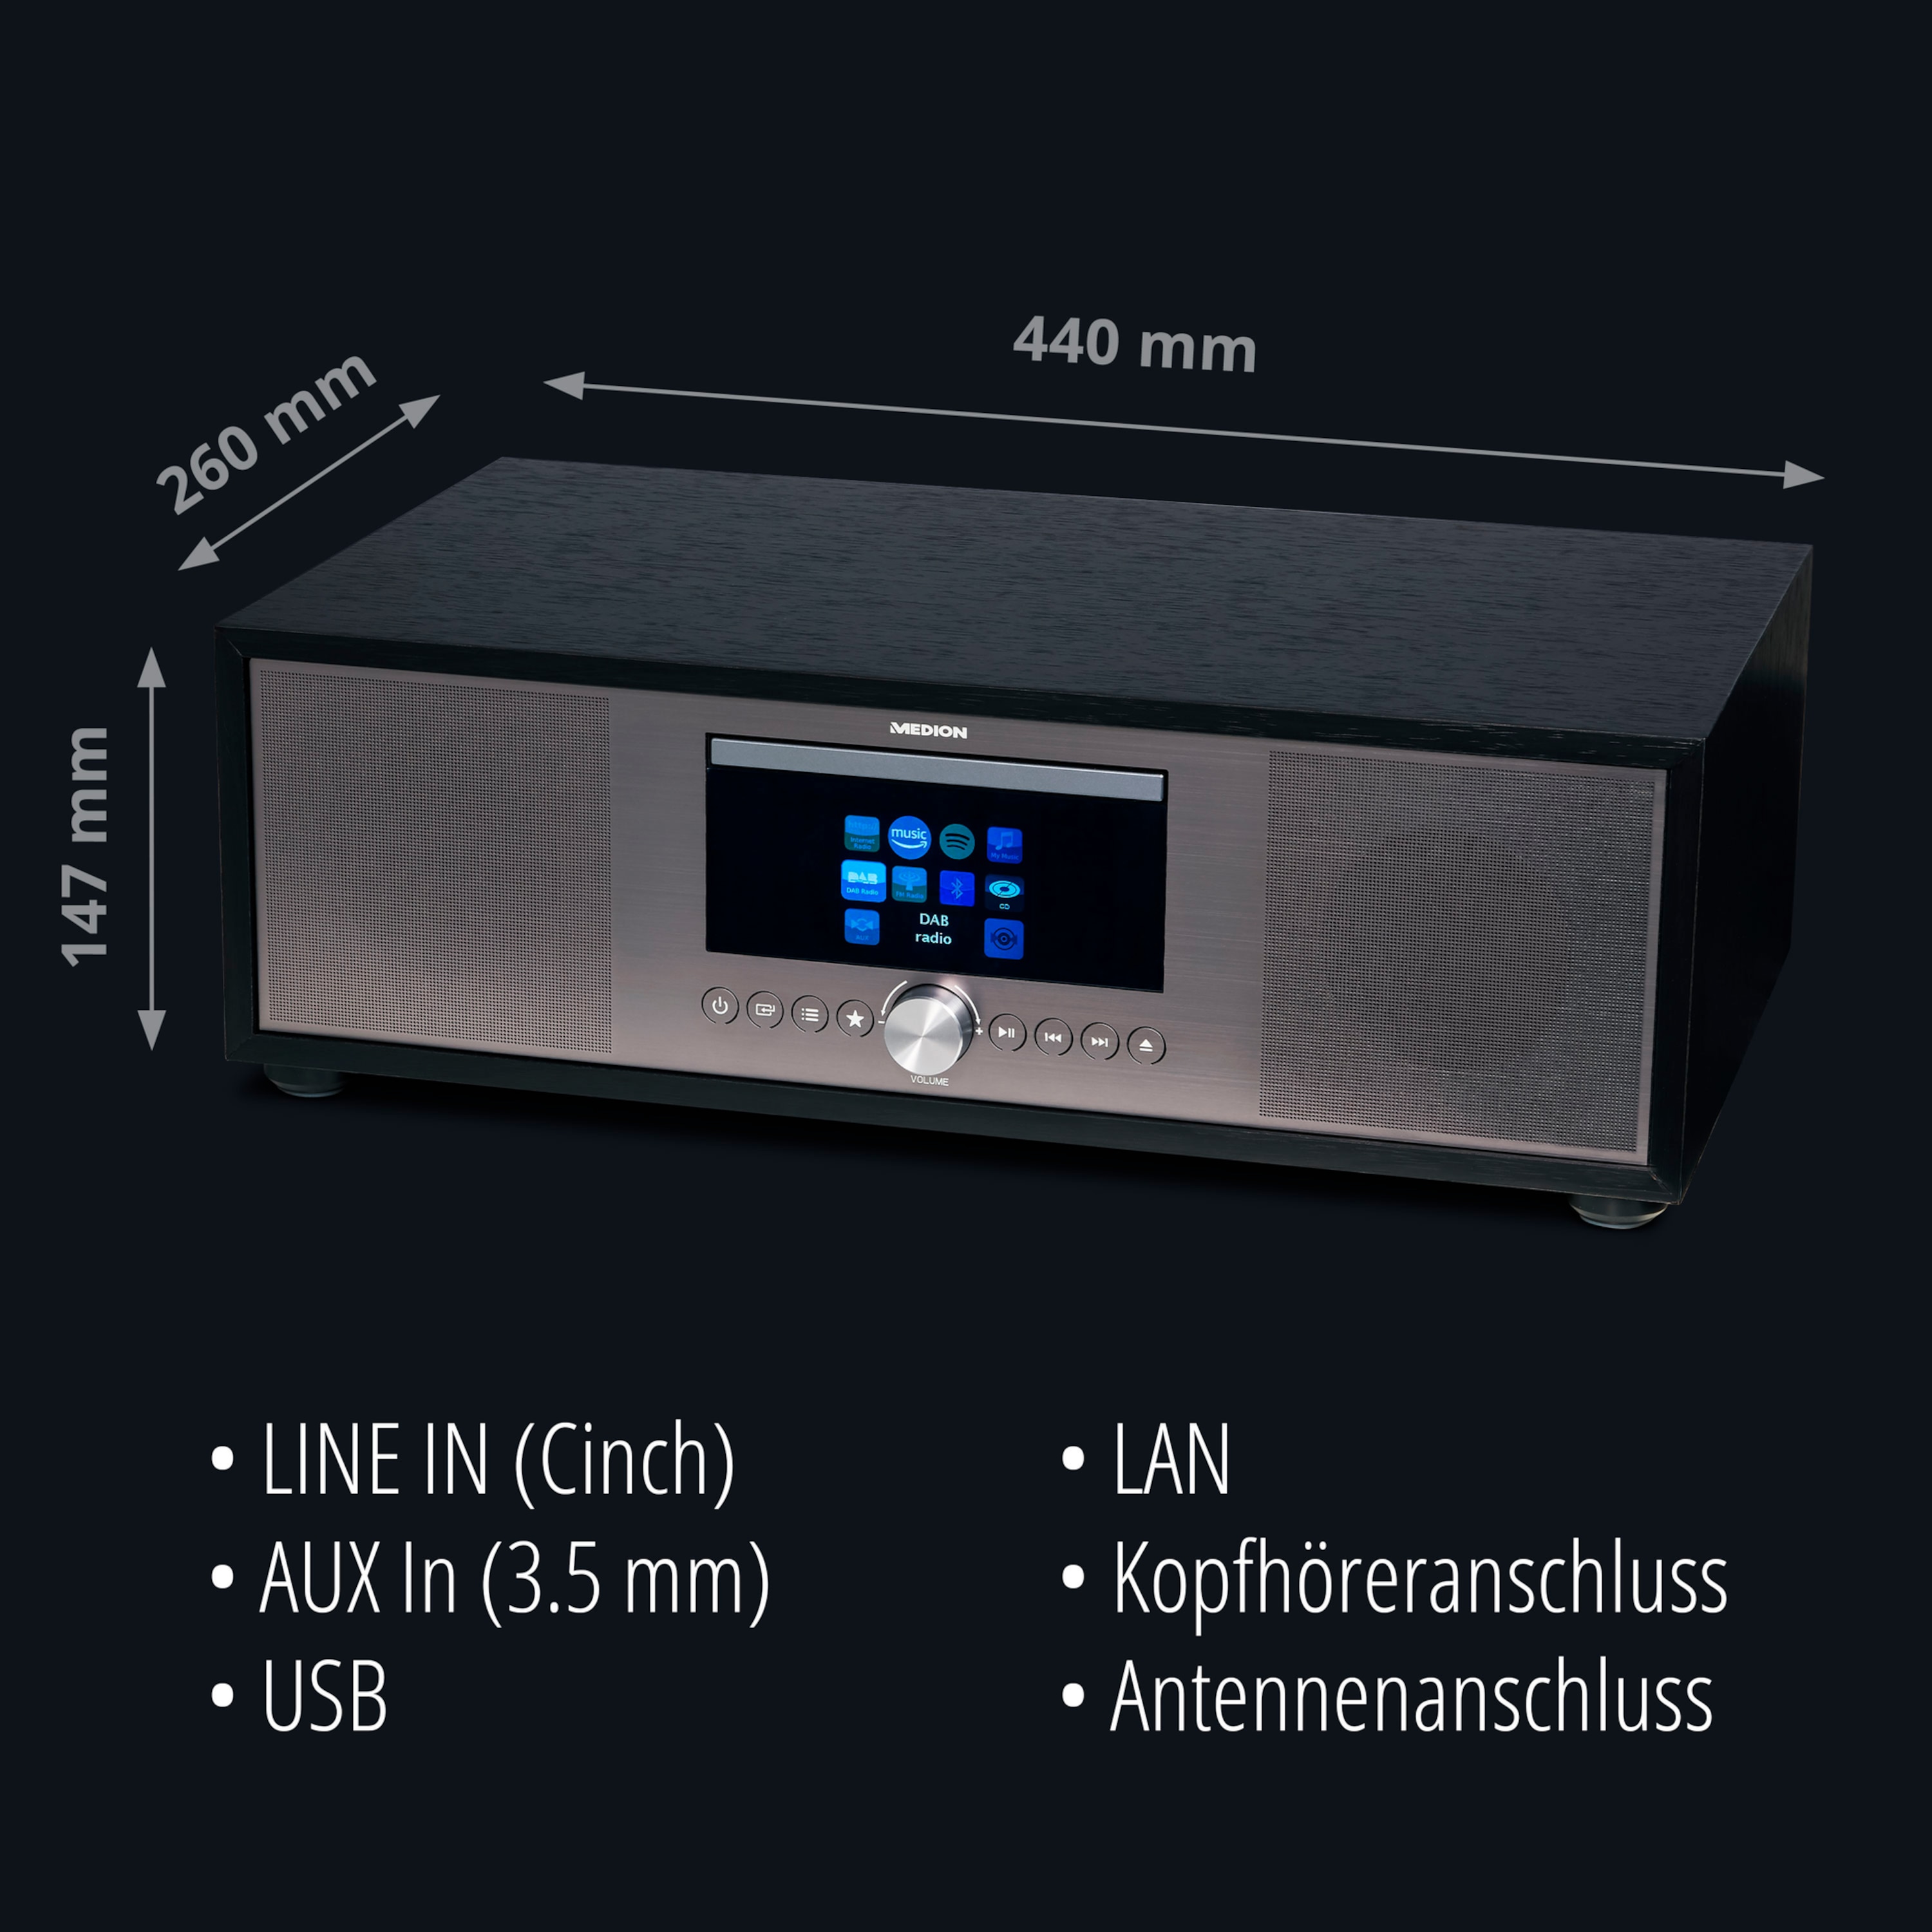 MEDION® LIFE® P66024 All-in-One Audio System, LCD-Display 7,1 (2.8''), Internet/DAB+/PLL-UKW Radio, CD/MP3-Player, Bluetooth® 5.0, DLNA,  2.1 Soundsystem, 2 x 20 W + 40 W RMS  (B-Ware)